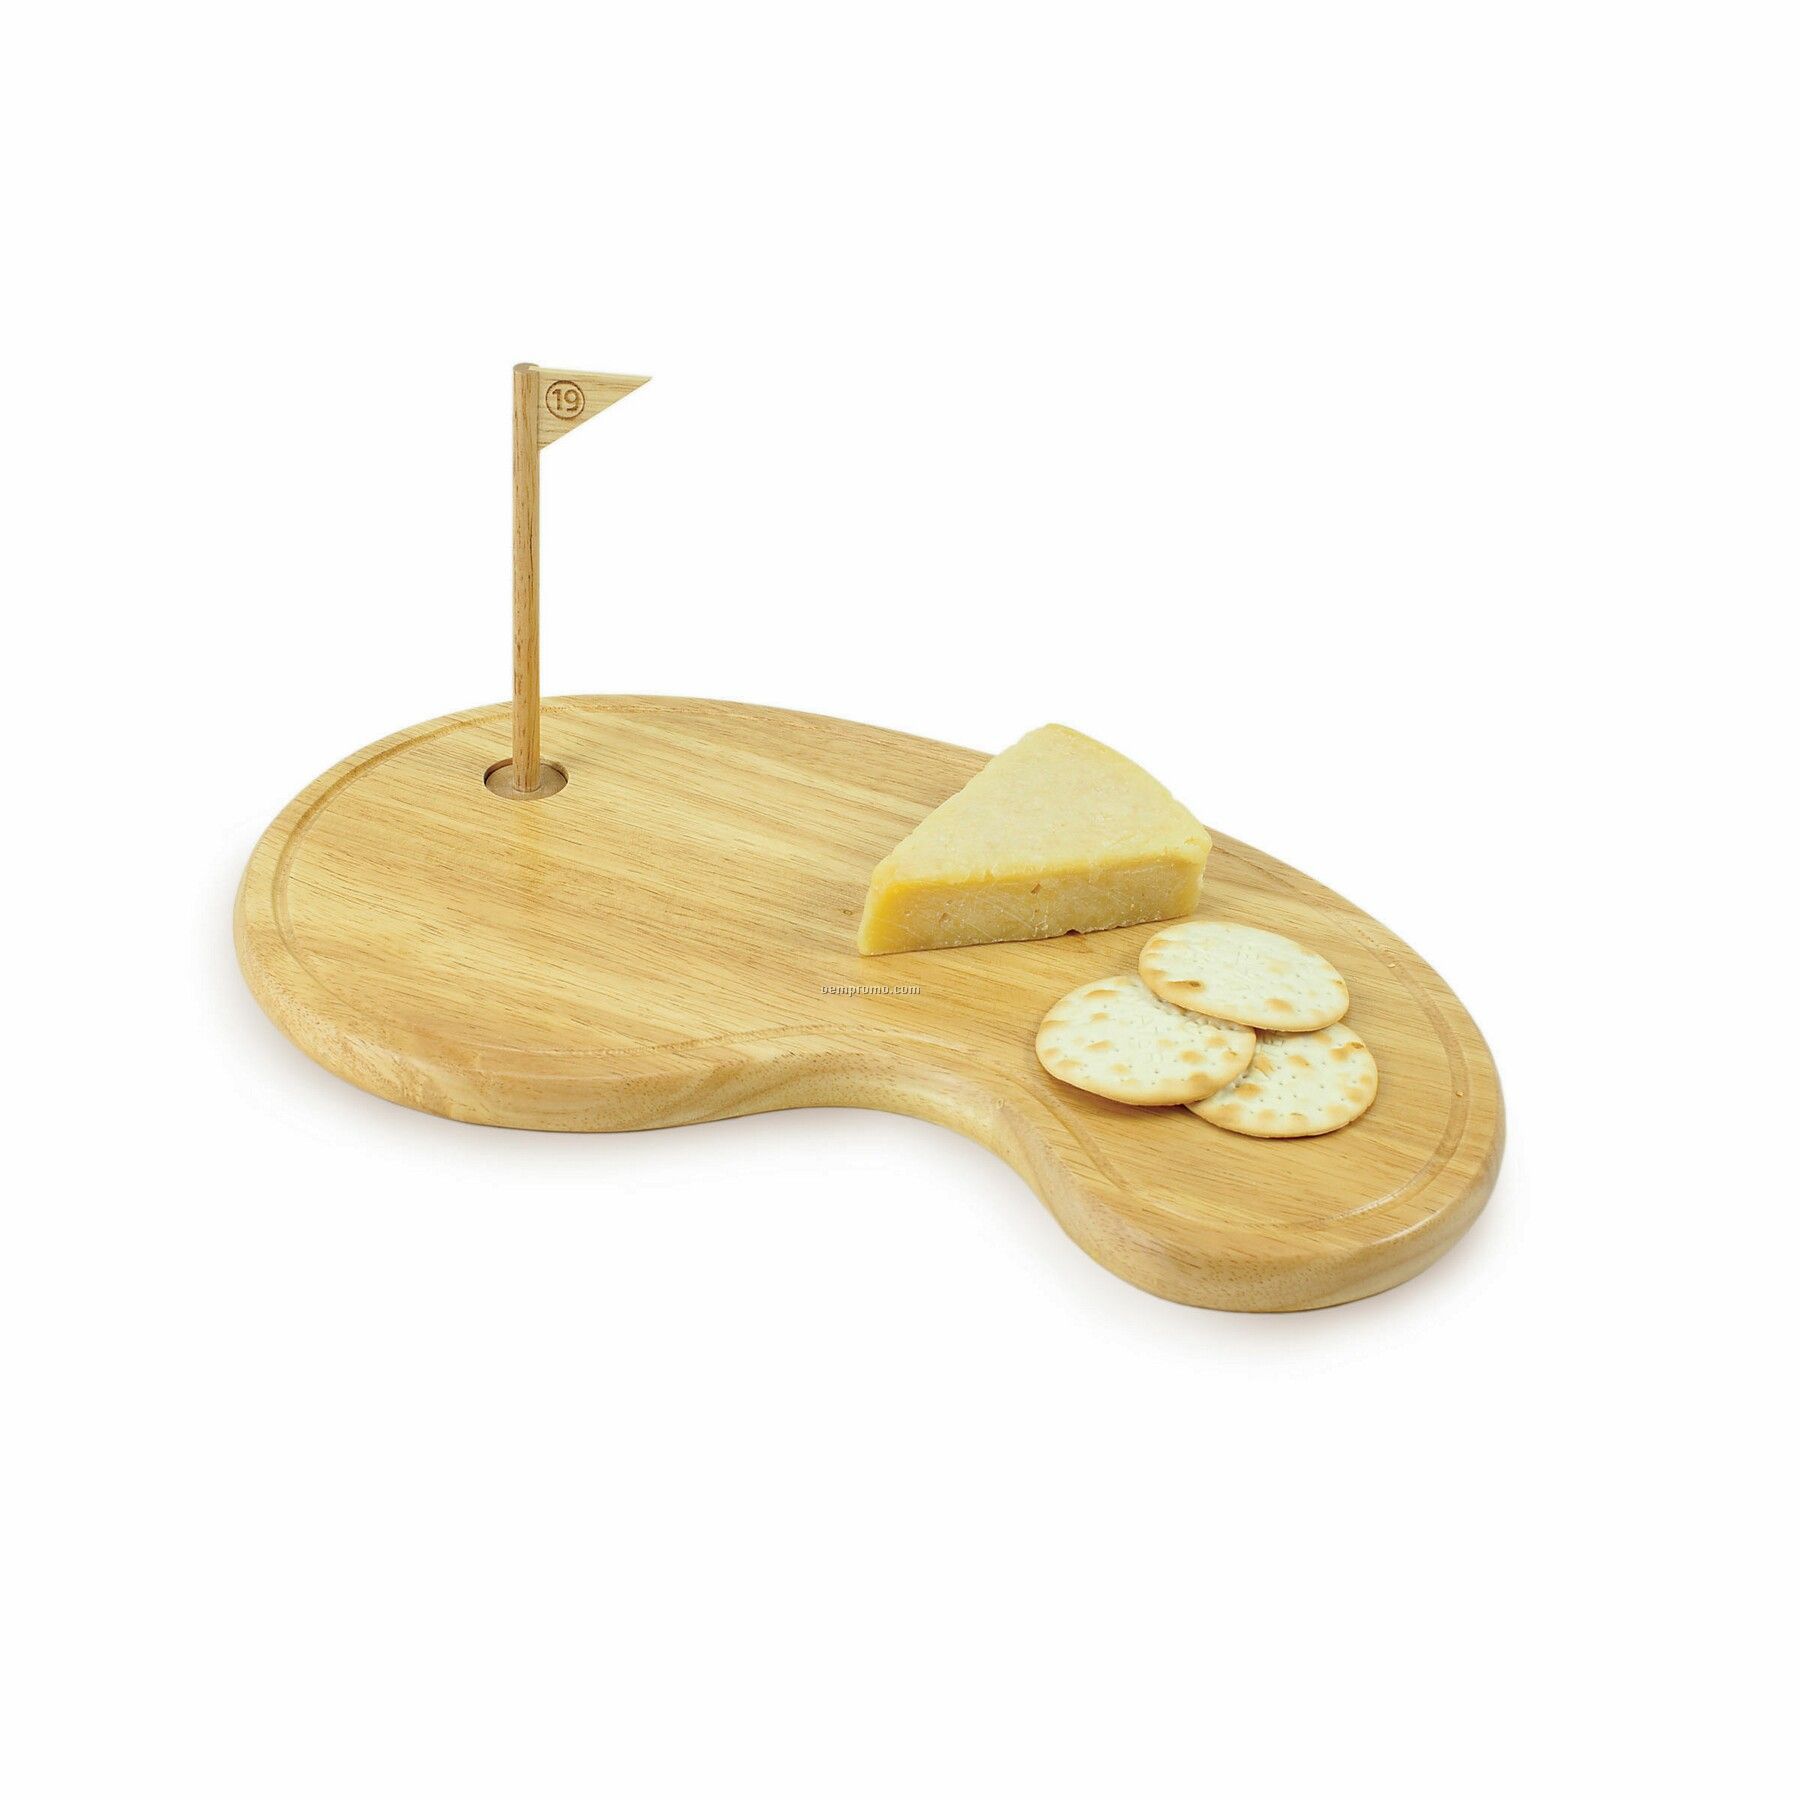 19th Hole Wood Cutting Board / Serving Tray (Putting Green Shaped)